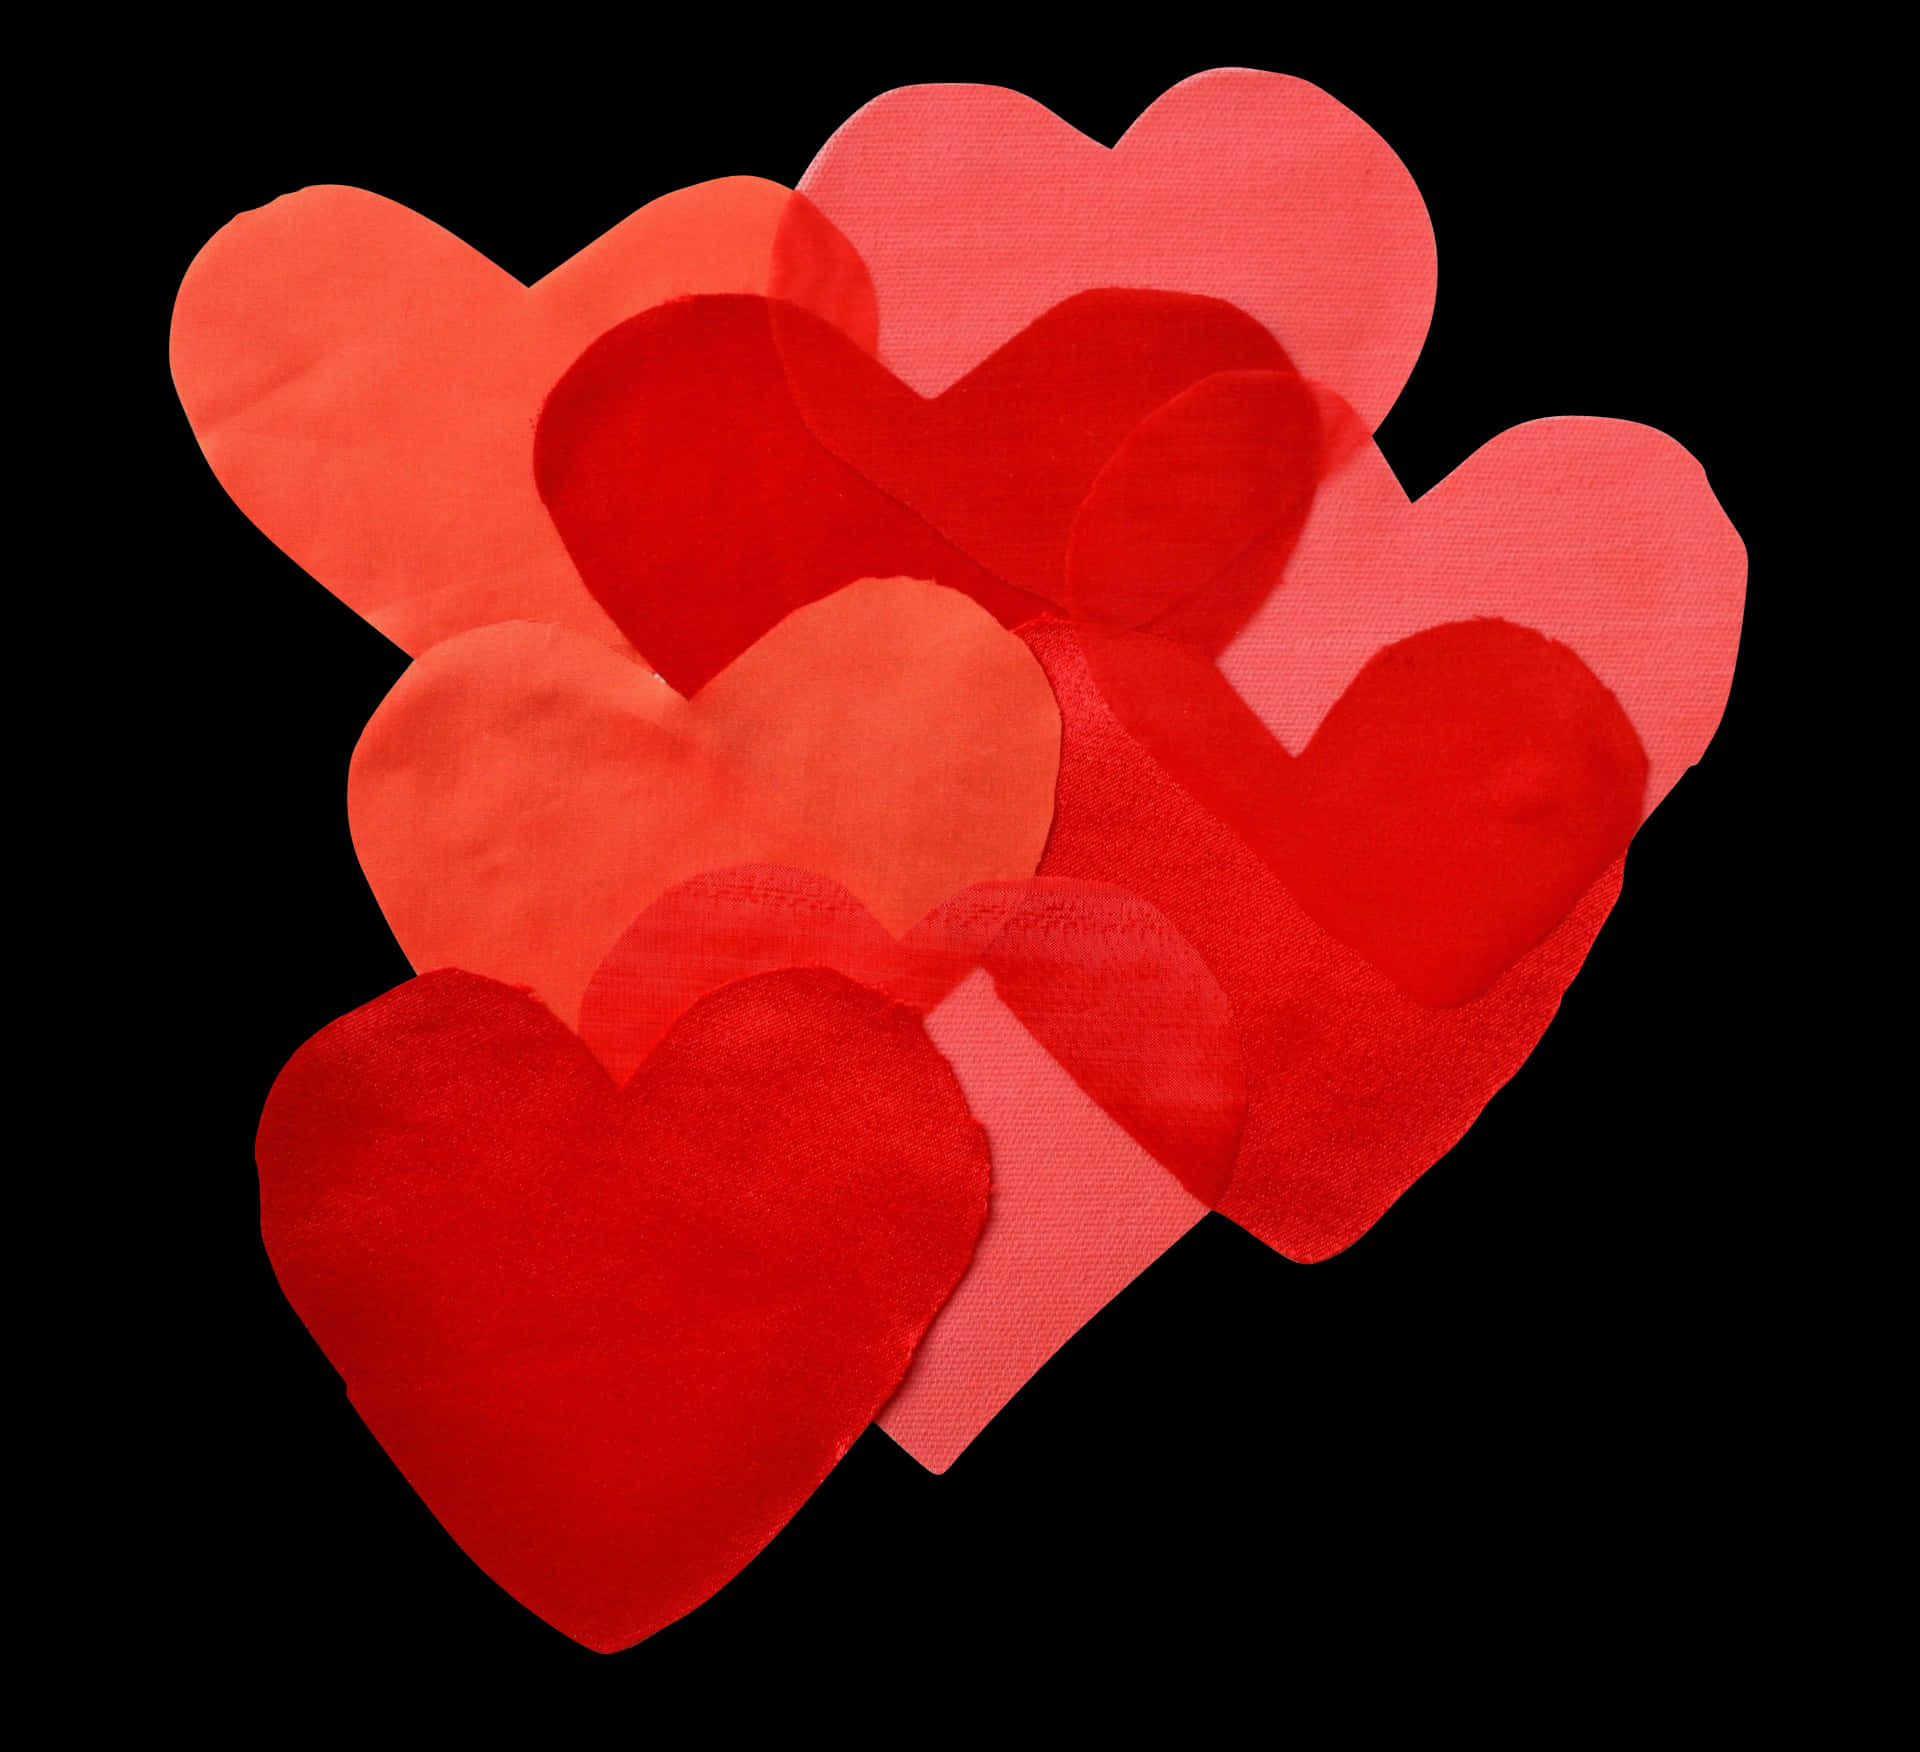 Red Fabric Hearts Black Background PNG